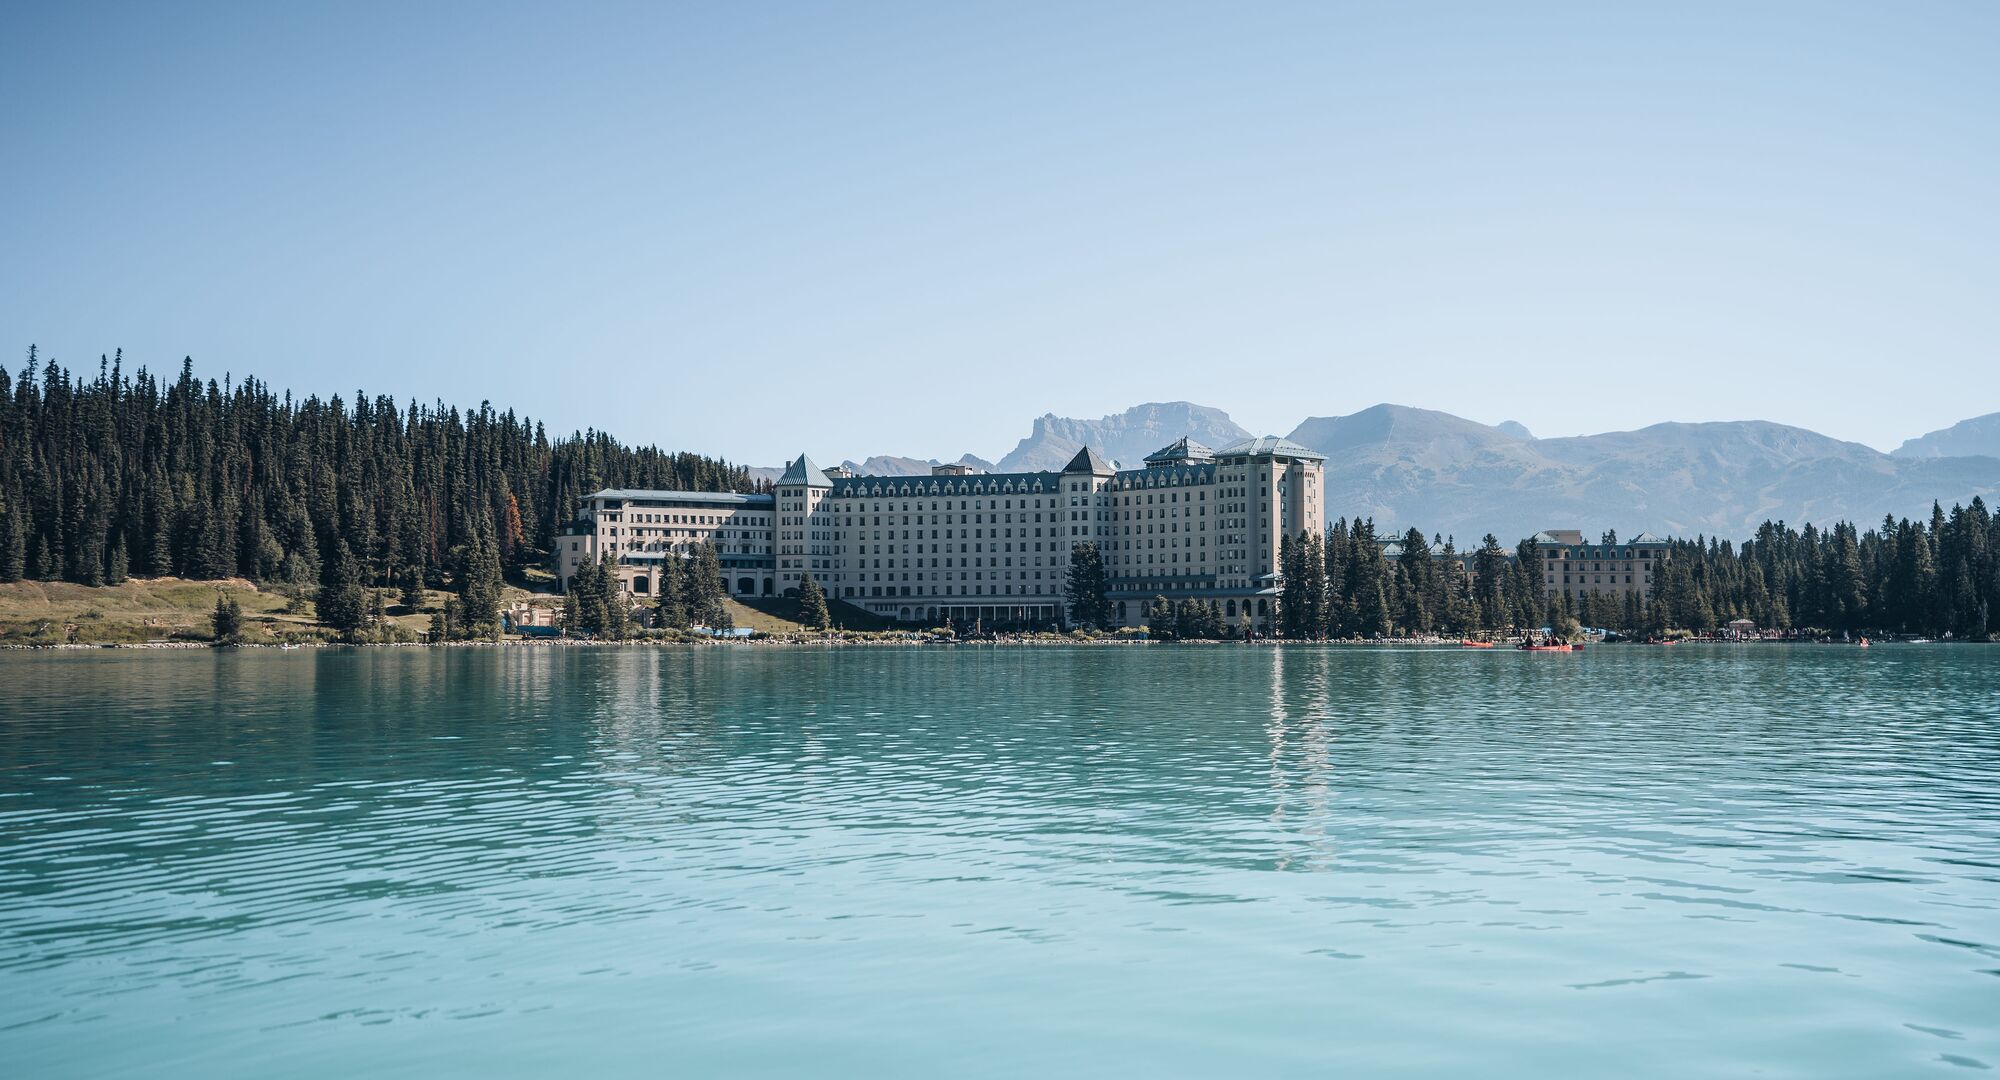 View of the Fairmont Chateau Lake Louise Hotel looking across the turquoise waters of Lake Louise